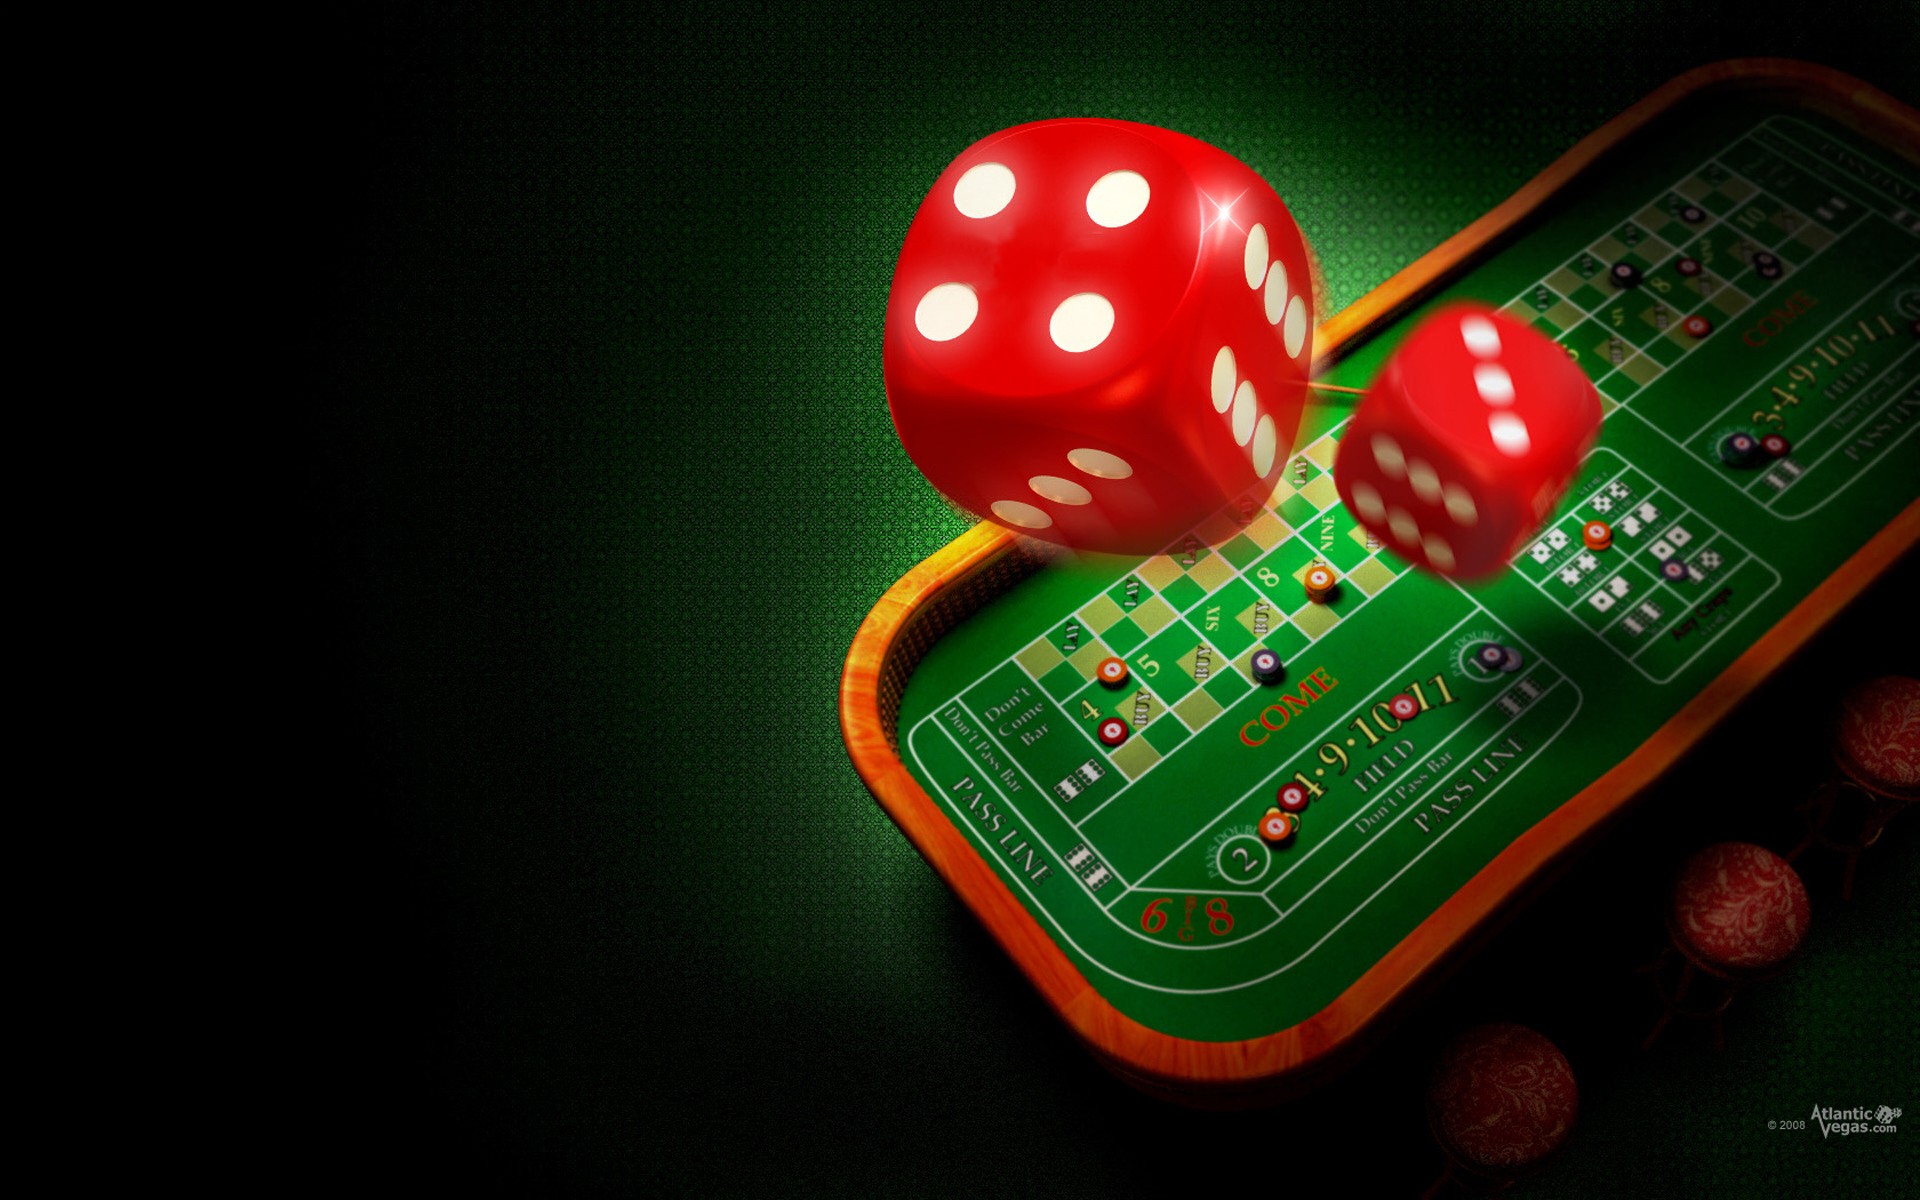 If You Want To Be A Winner, Change Your Online Gambling